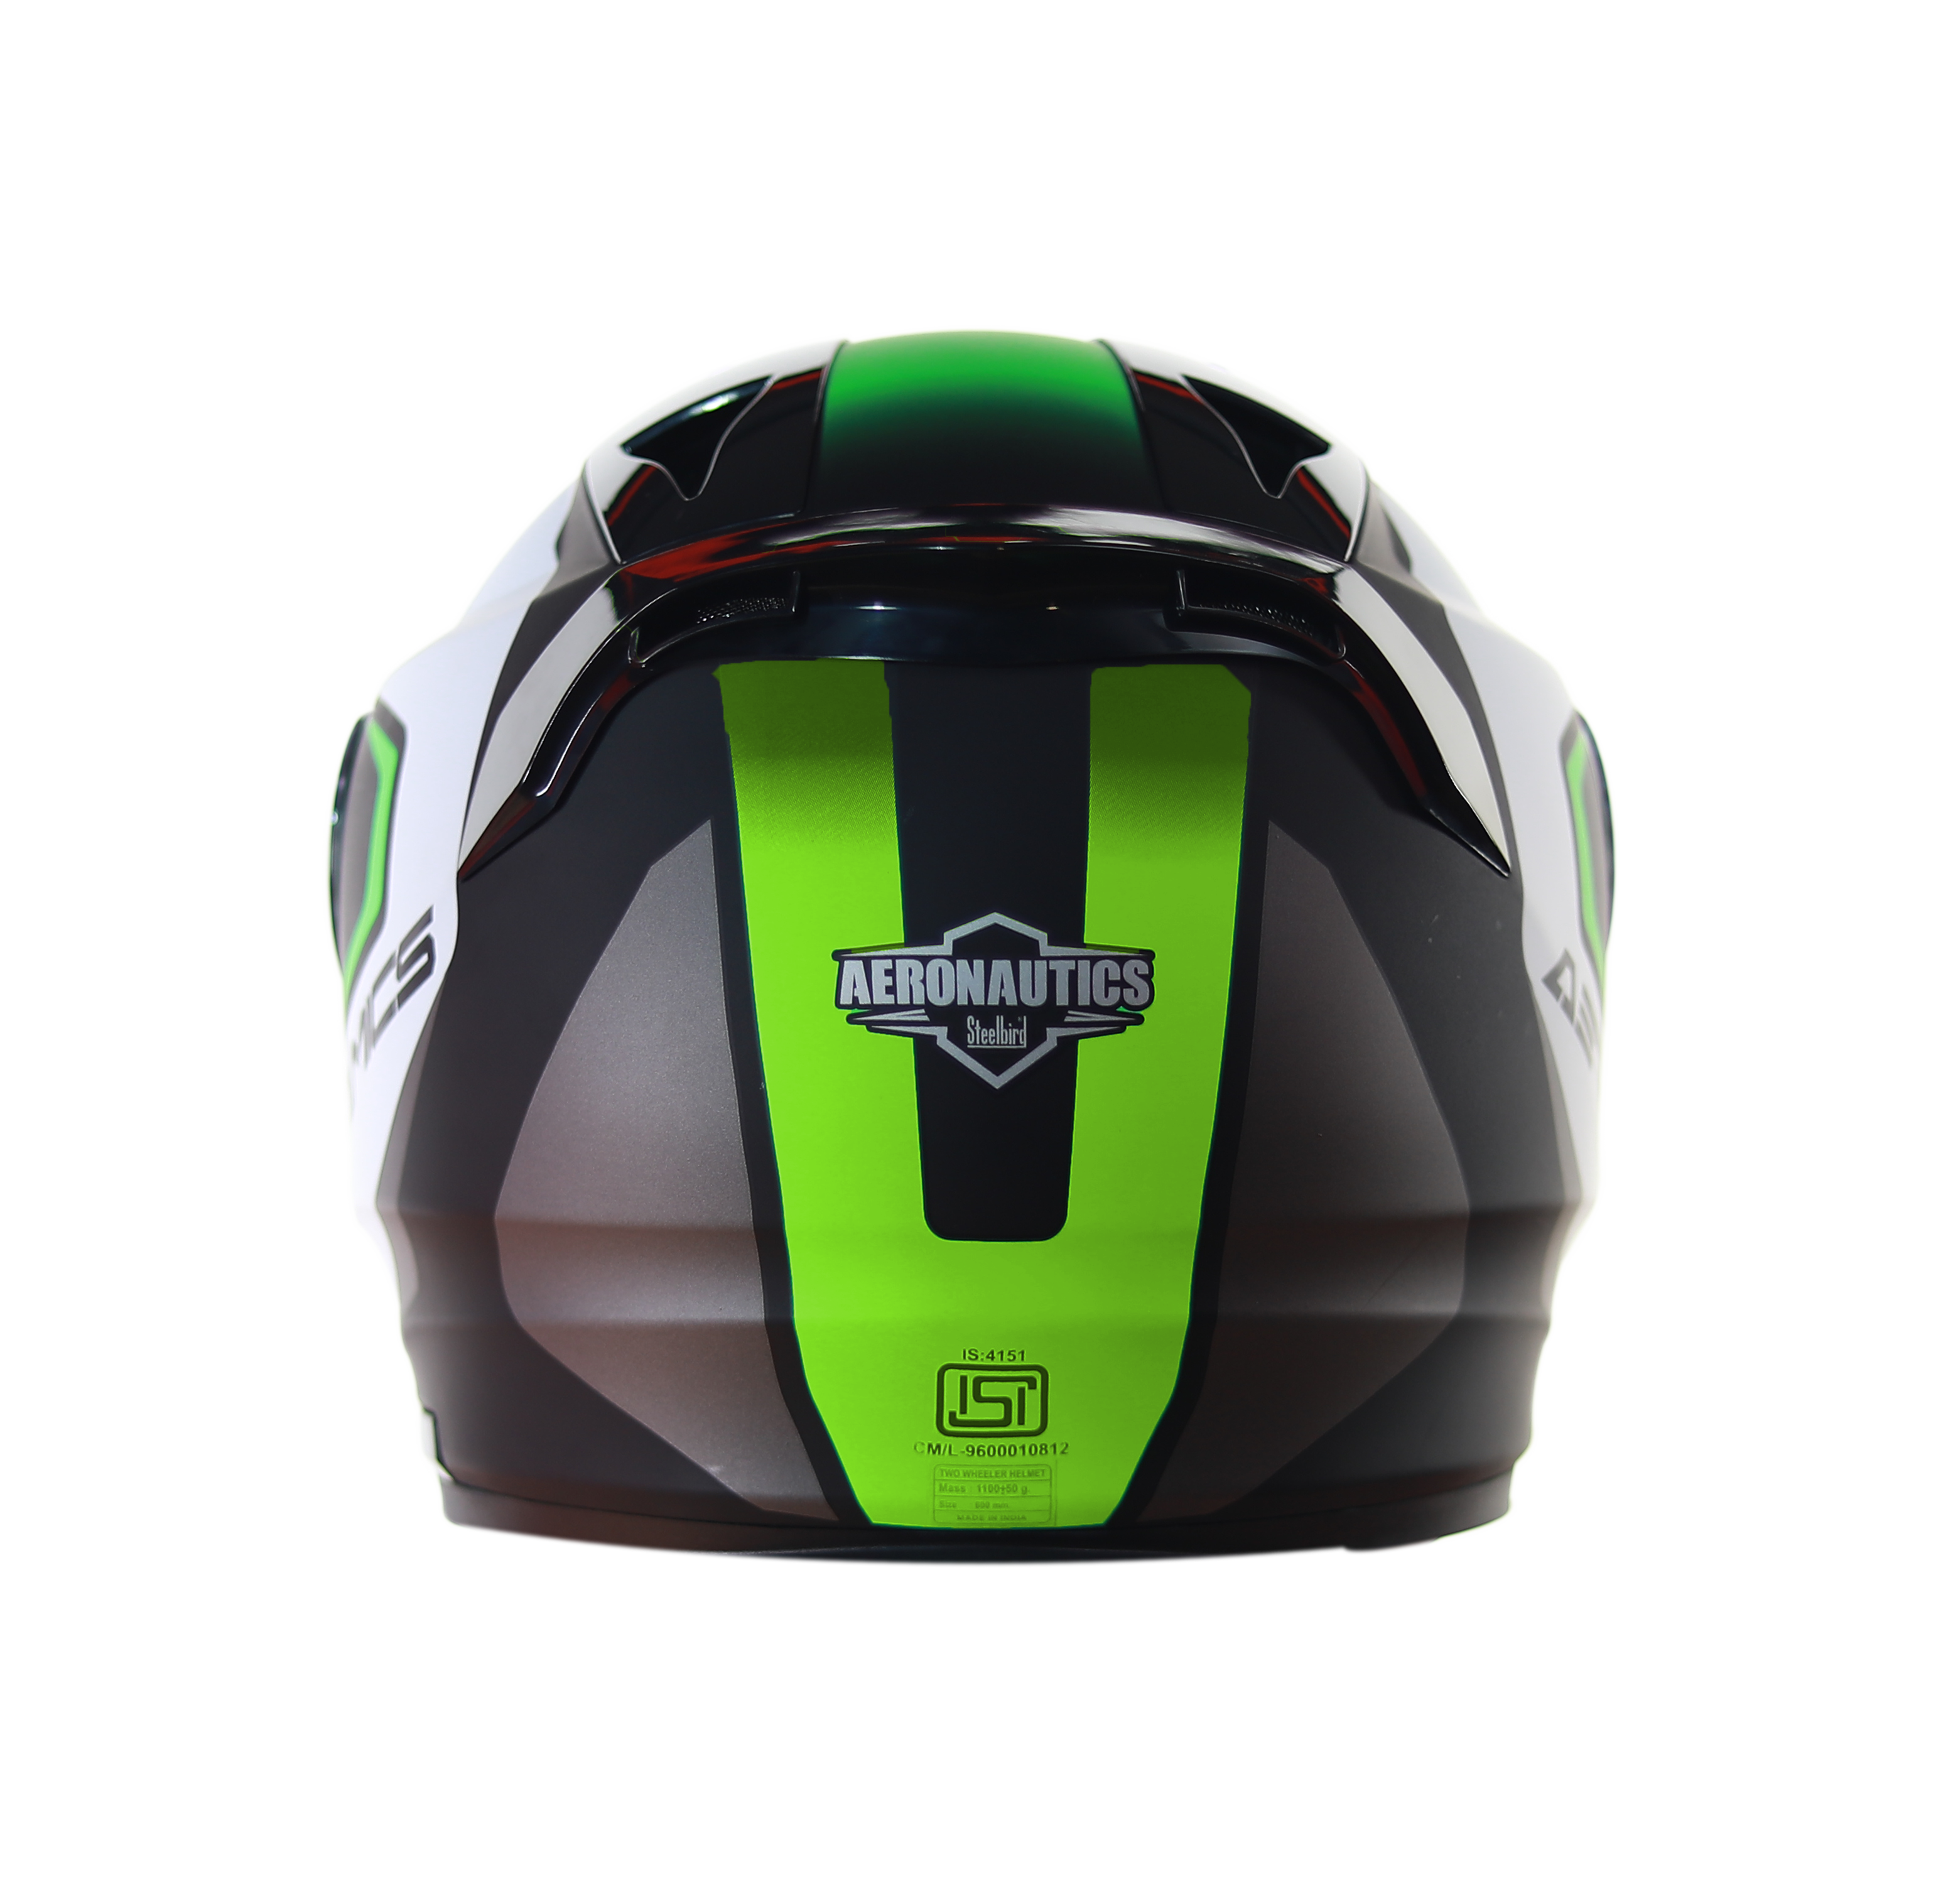 SA-1 Aerodynamics Mat Black/Neon With Anti-Fog Shield Gold Night Vision Visor (Fitted With Clear Visor Extra Gold Night Vision Anti-Fog Shield Visor Free)